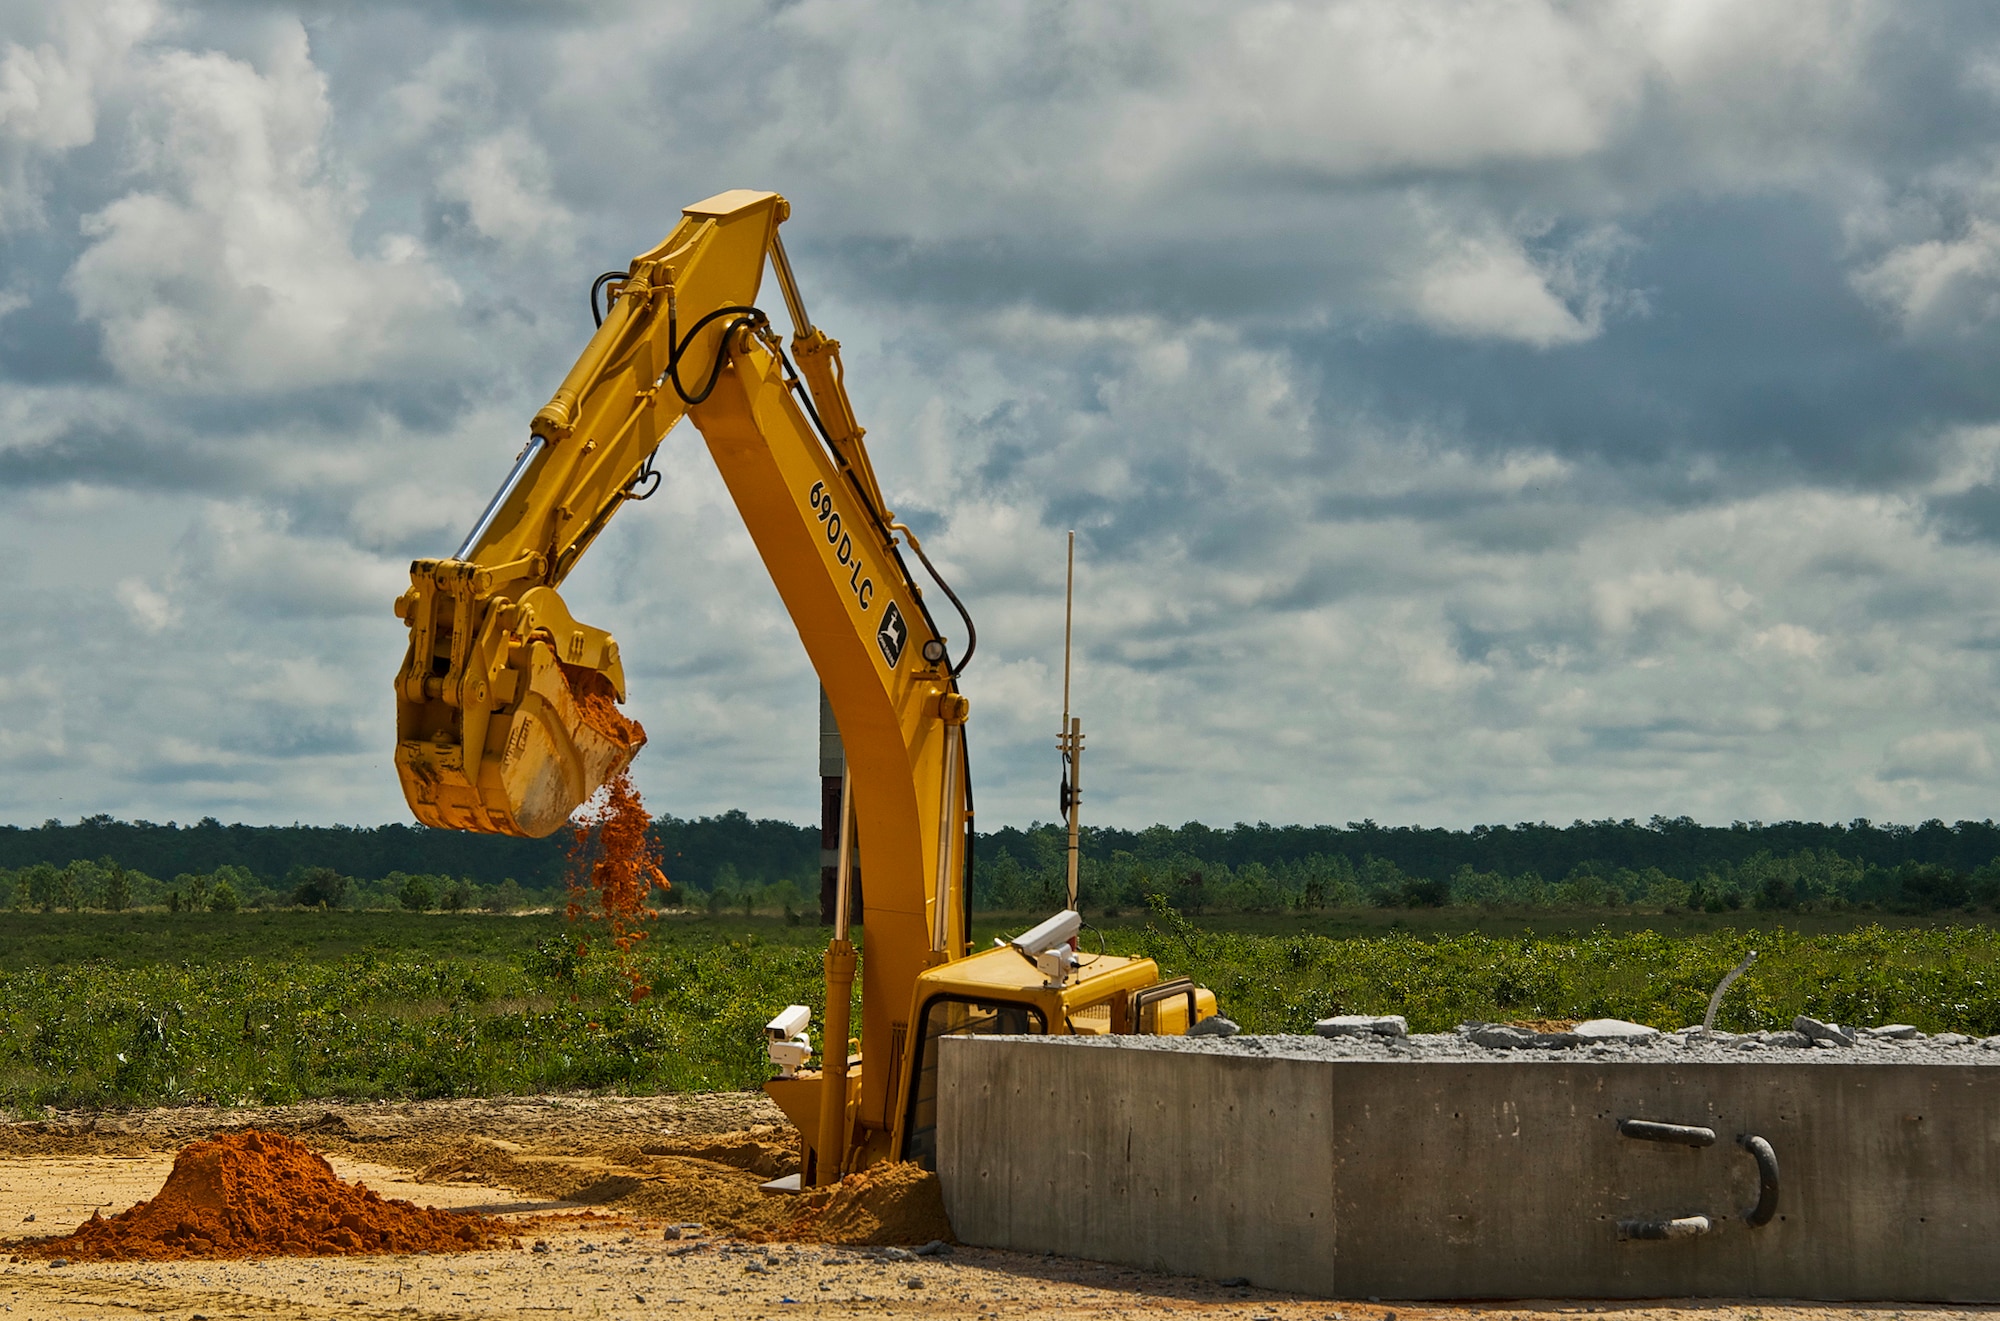 A 96th Civil Engineer Squadron robotics team member manually operates a large robotic excavator, the “John Deere 690D,” before leaving it to remotely dig via operators in a trailer a safe distance away from the test site Sept. 9. Their modified vehicles are designed for remote manipulation of hazardous items using hydraulically actuated “arm” manipulators.  The arms have reasonably high dexterity, enough to use a screwdriver and other tools, while having enough power to roll a car.  The controllers for the robotic arms follow along the operator’s arm virtually in a trailer set approximately a mile from the site for safety. (U.S. Air Force photo/Chrissy Cuttita)